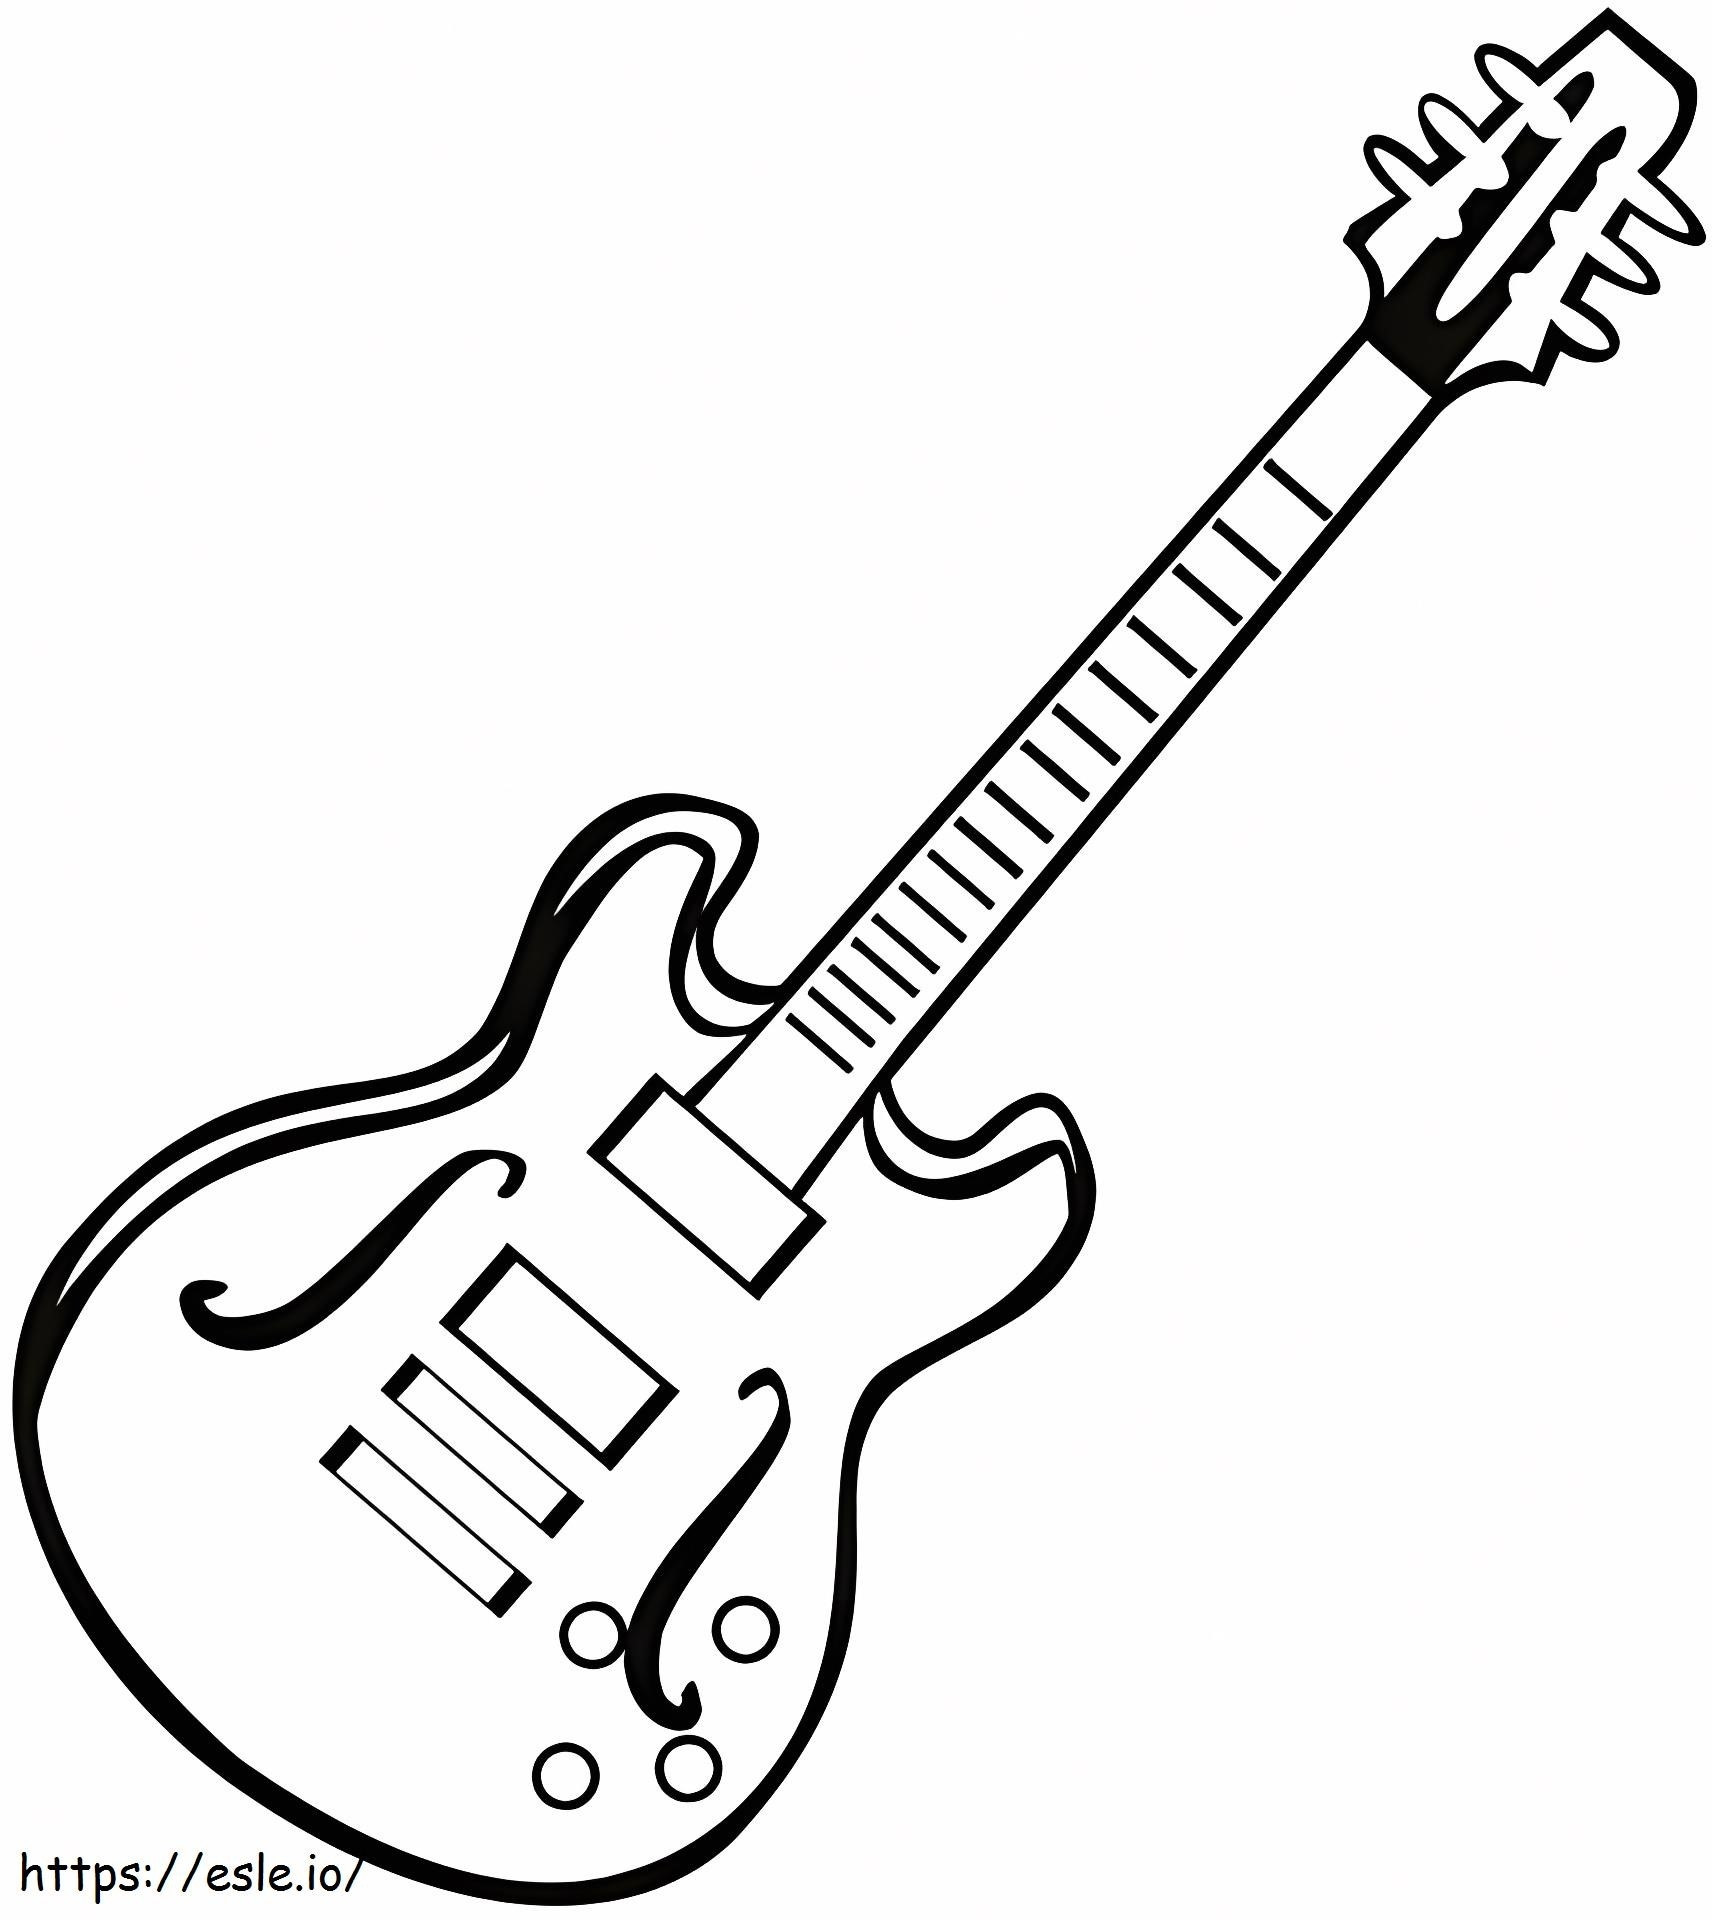 Basic Electric Guitar coloring page